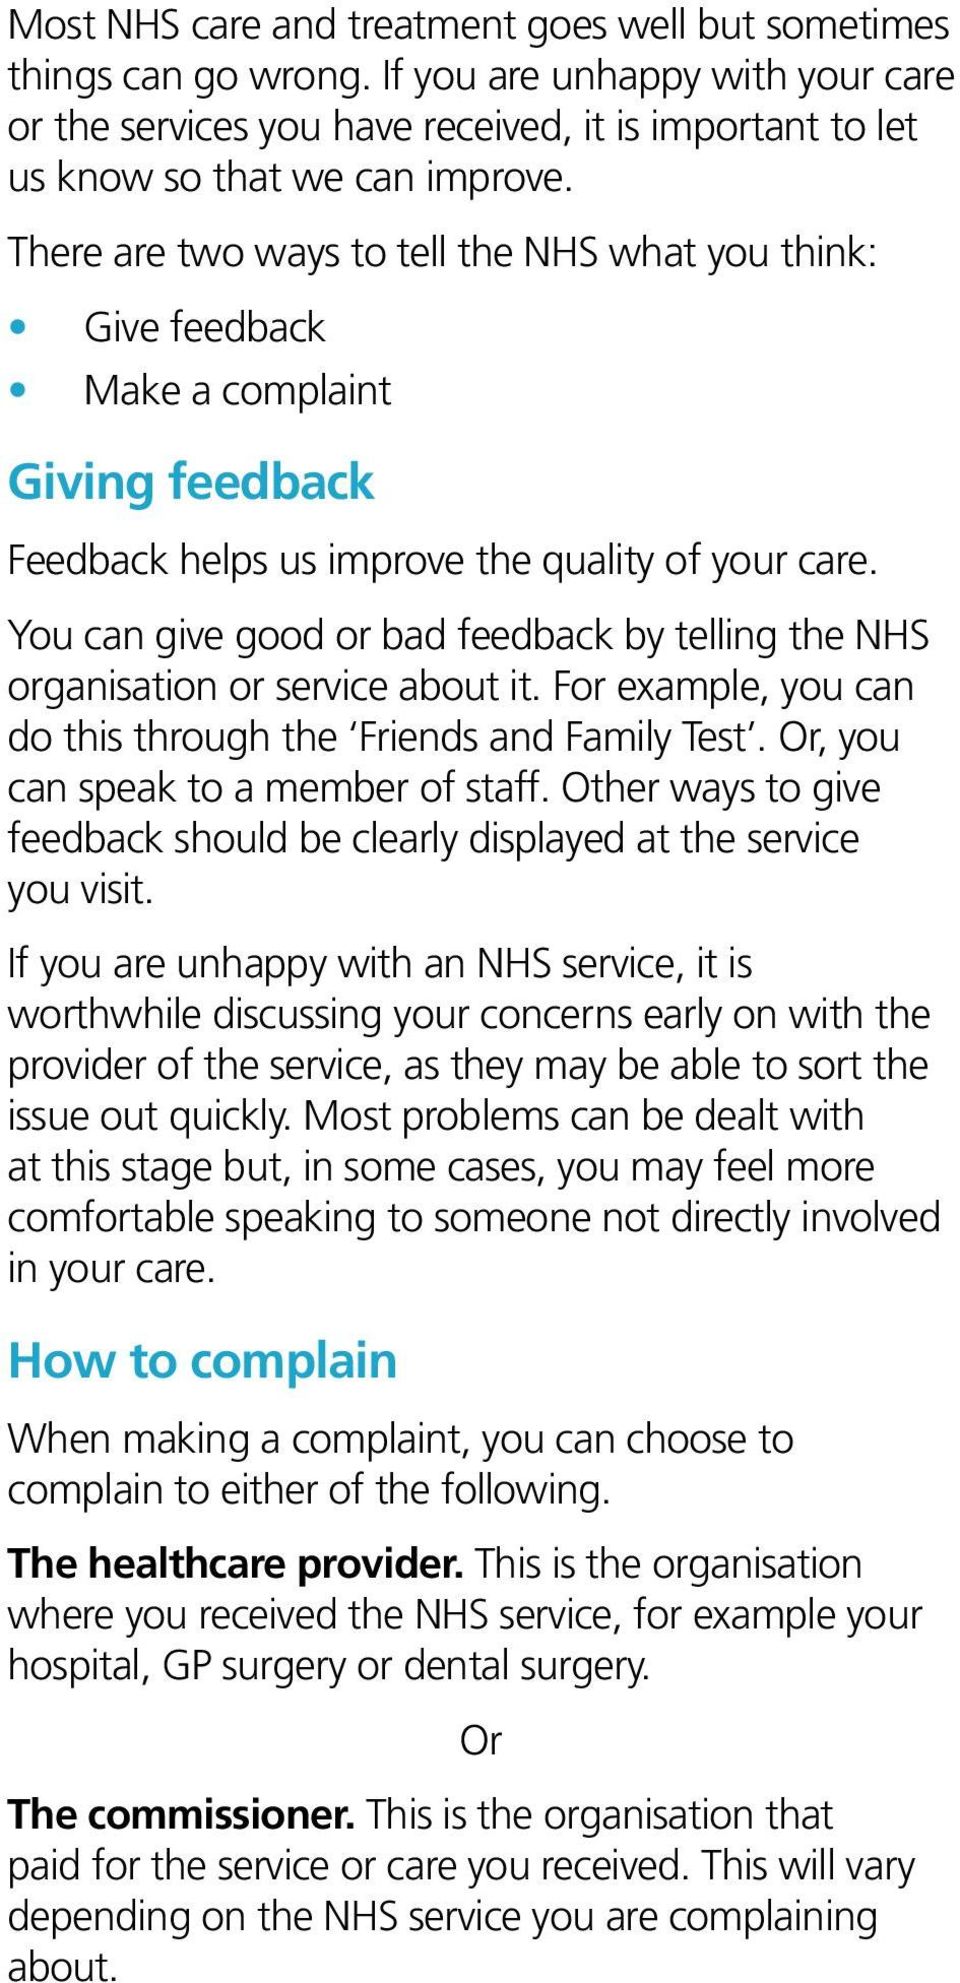 You can give good or bad feedback by telling the NHS organisation or service about it. For example, you can do this through the Friends and Family Test. Or, you can speak to a member of staff.